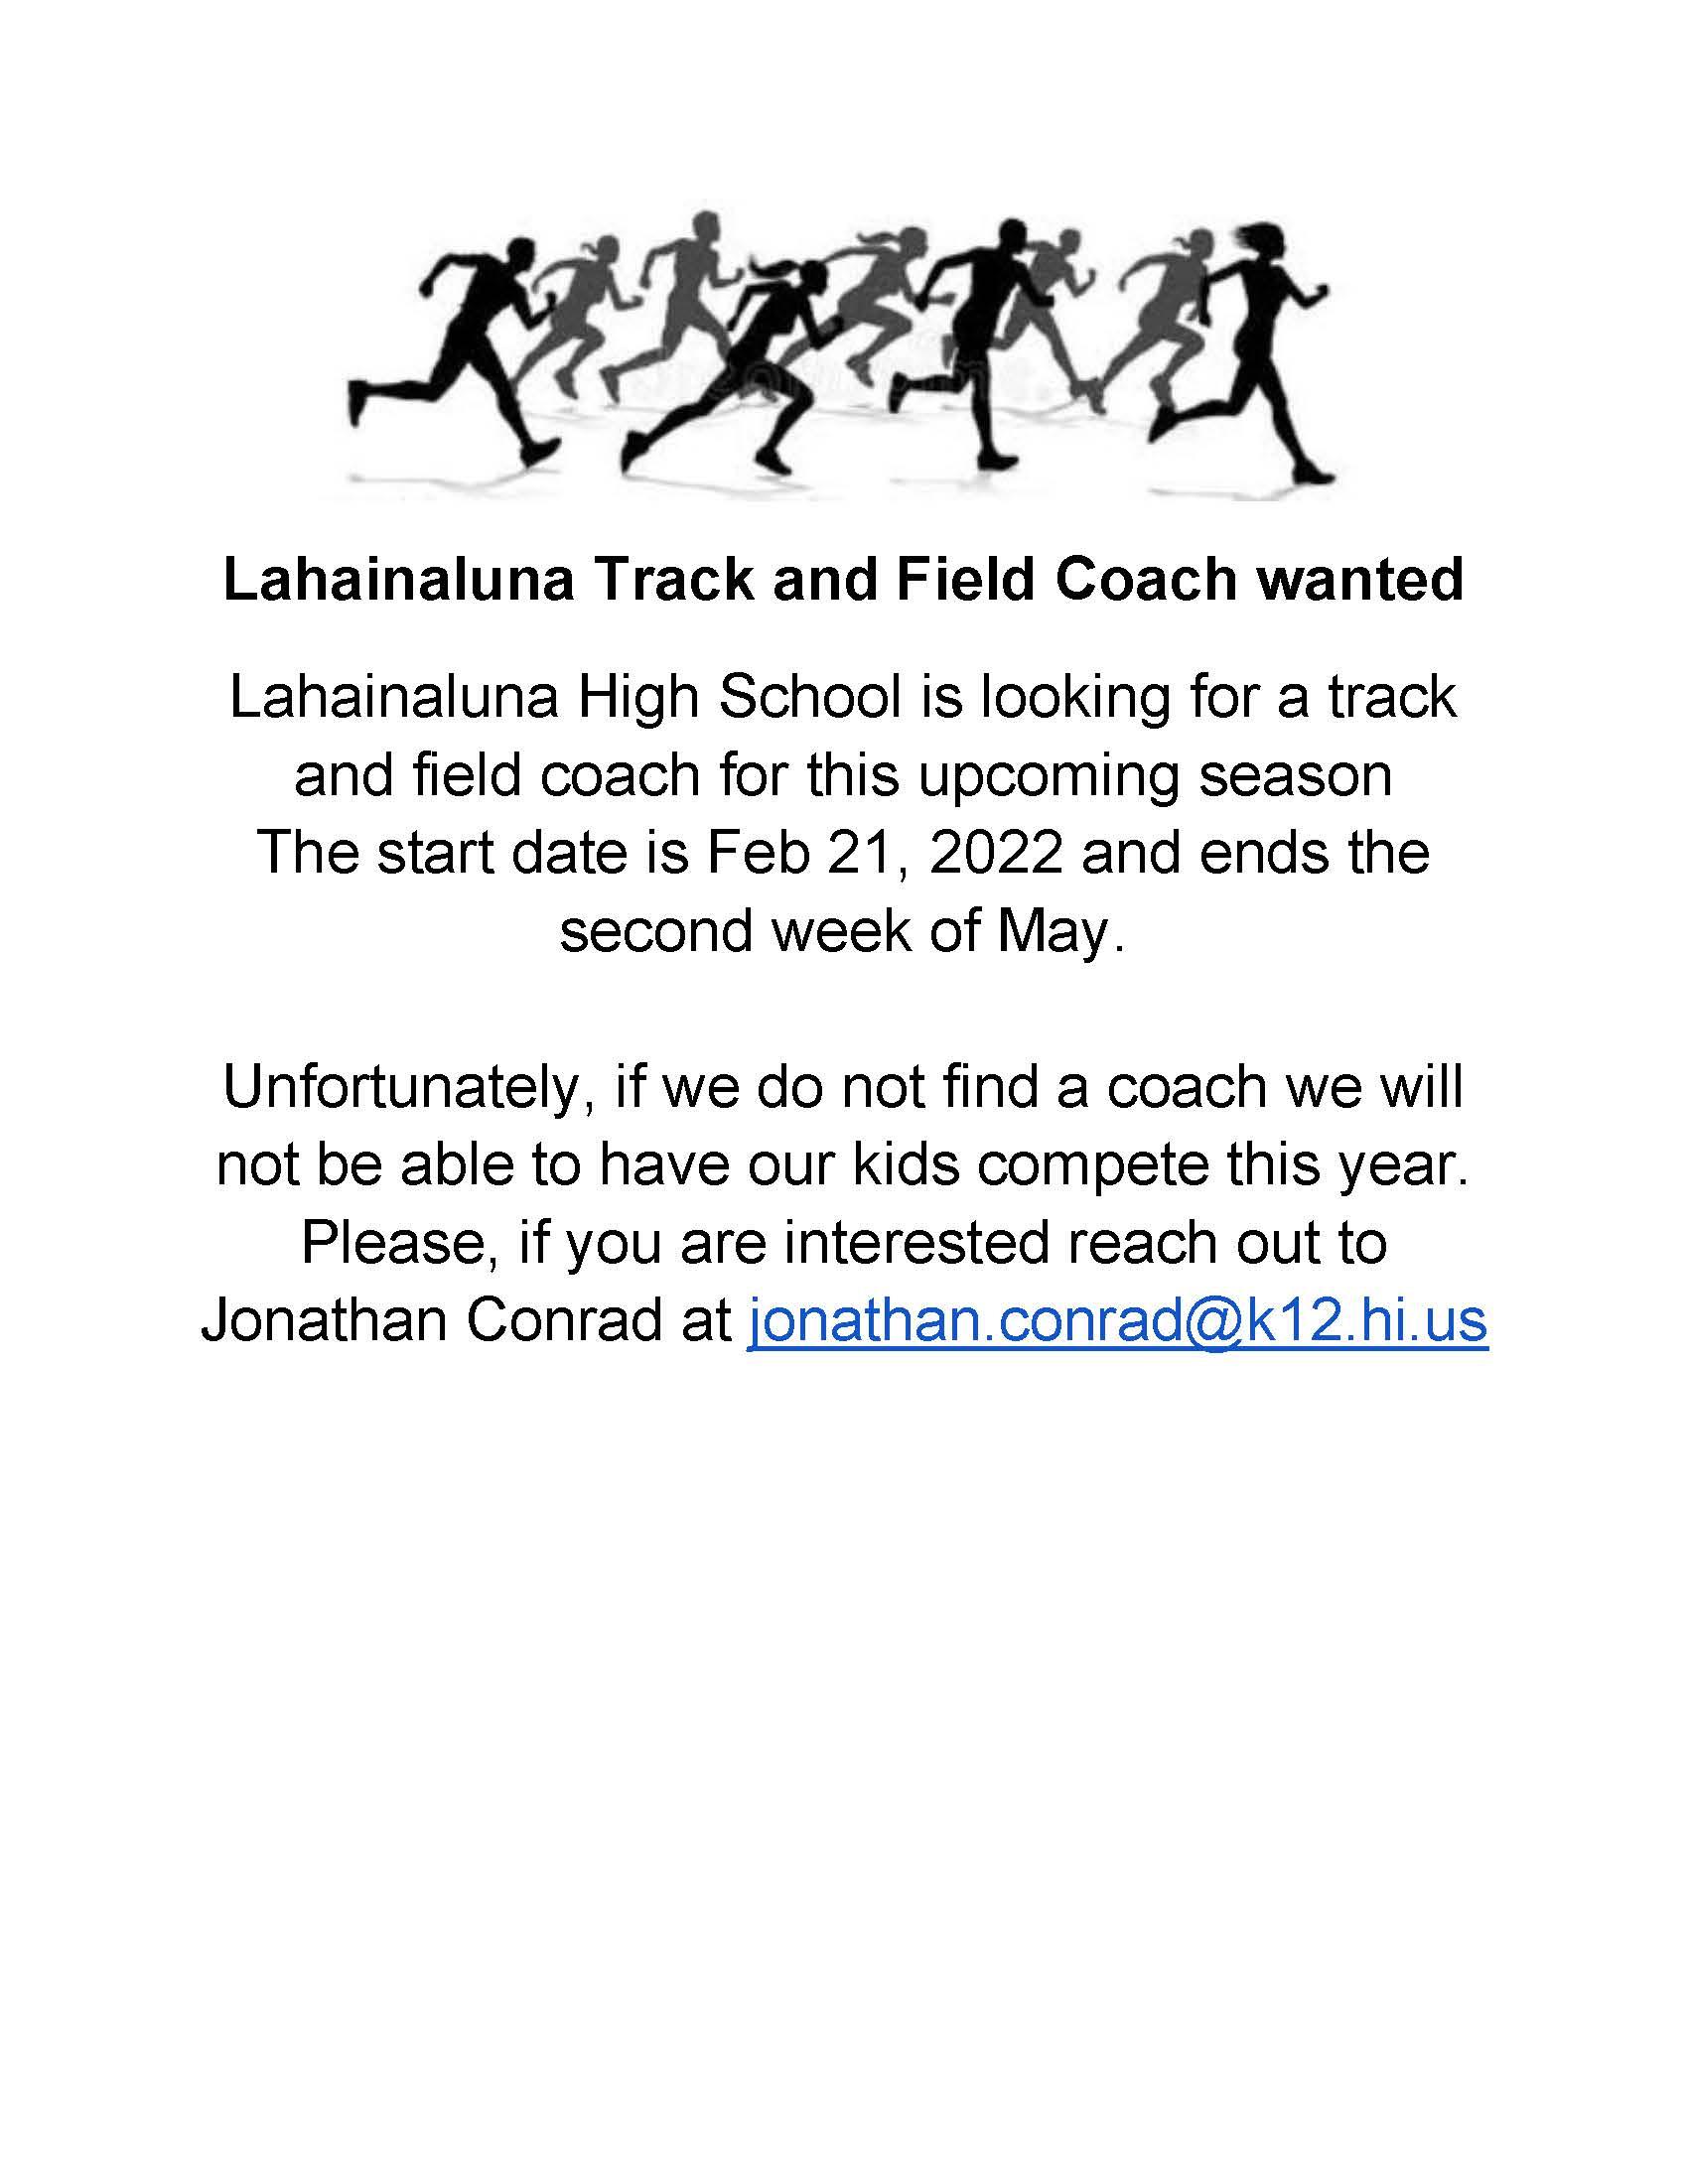 Lahainaluna High School Track and Field Coach wanted